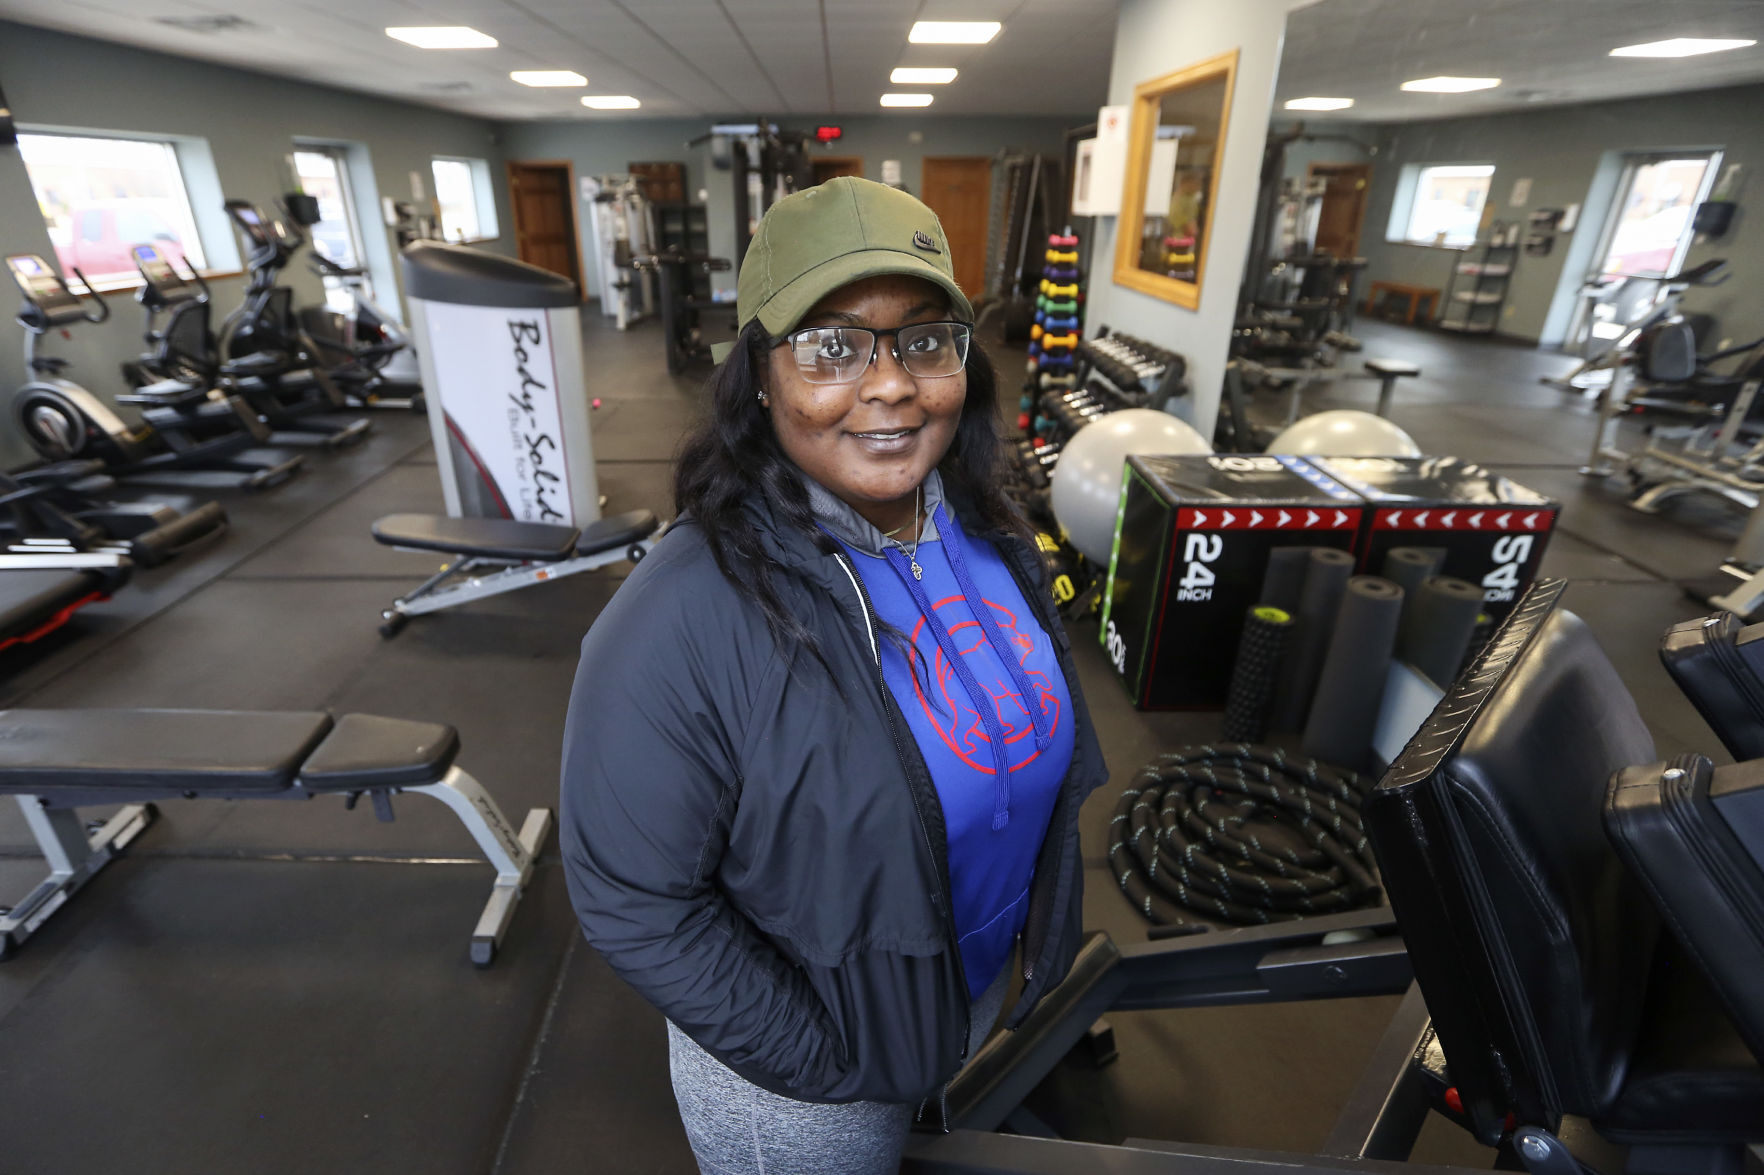 Jasmine Stoewer is owner of The Fitness Foundry in Galena, Ill. PHOTO CREDIT: NICKI KOHL